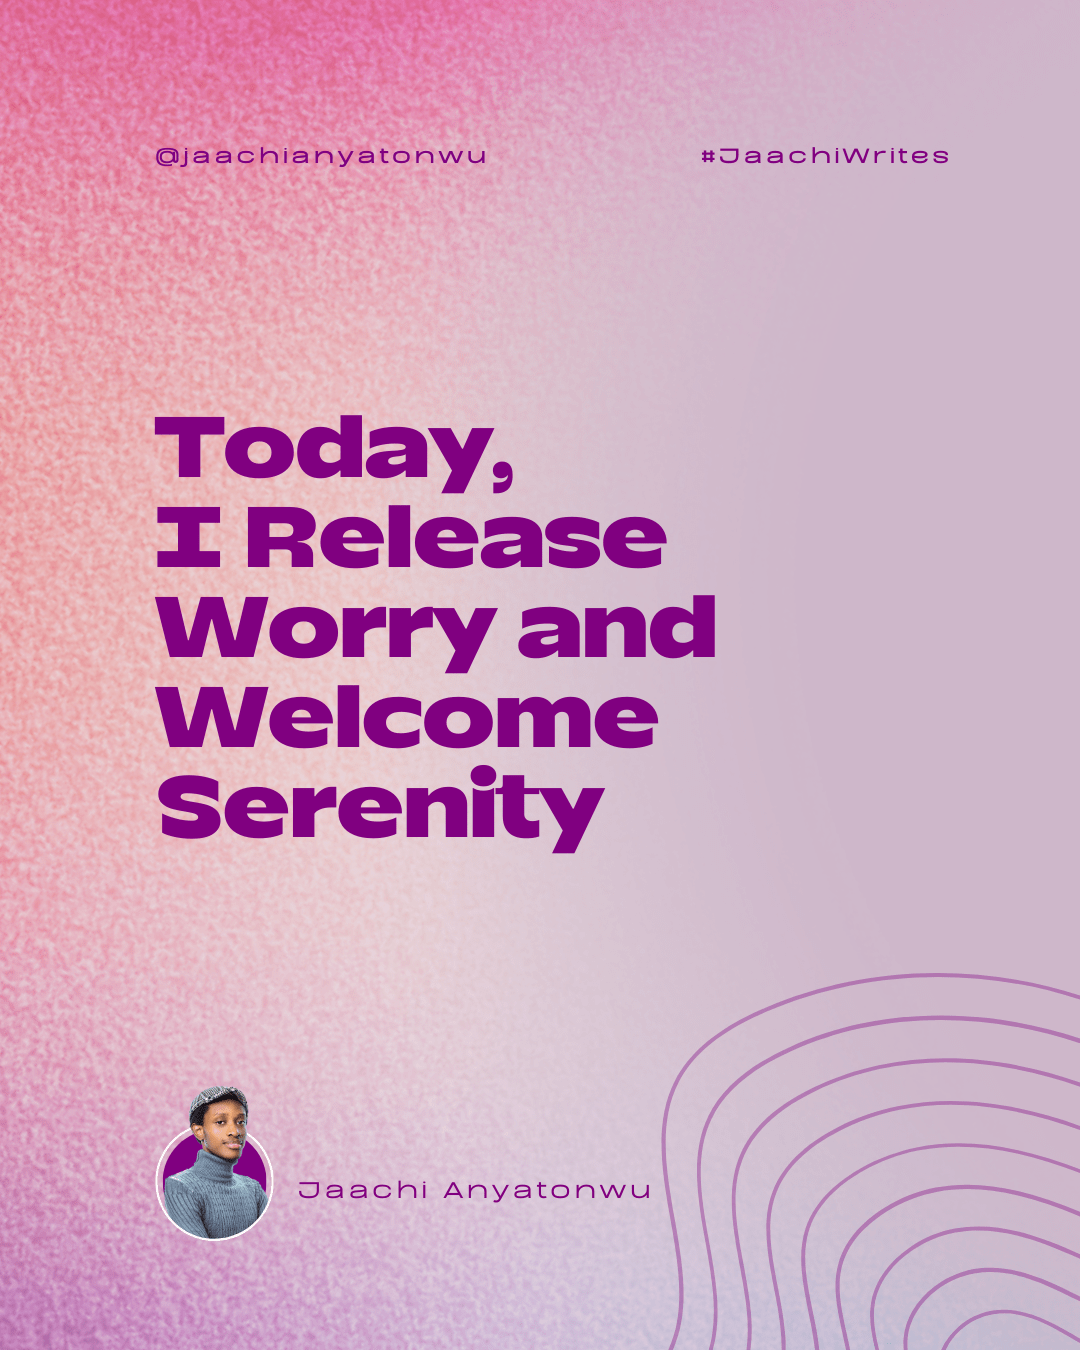 Today, I Release Worry and Welcome Serenity